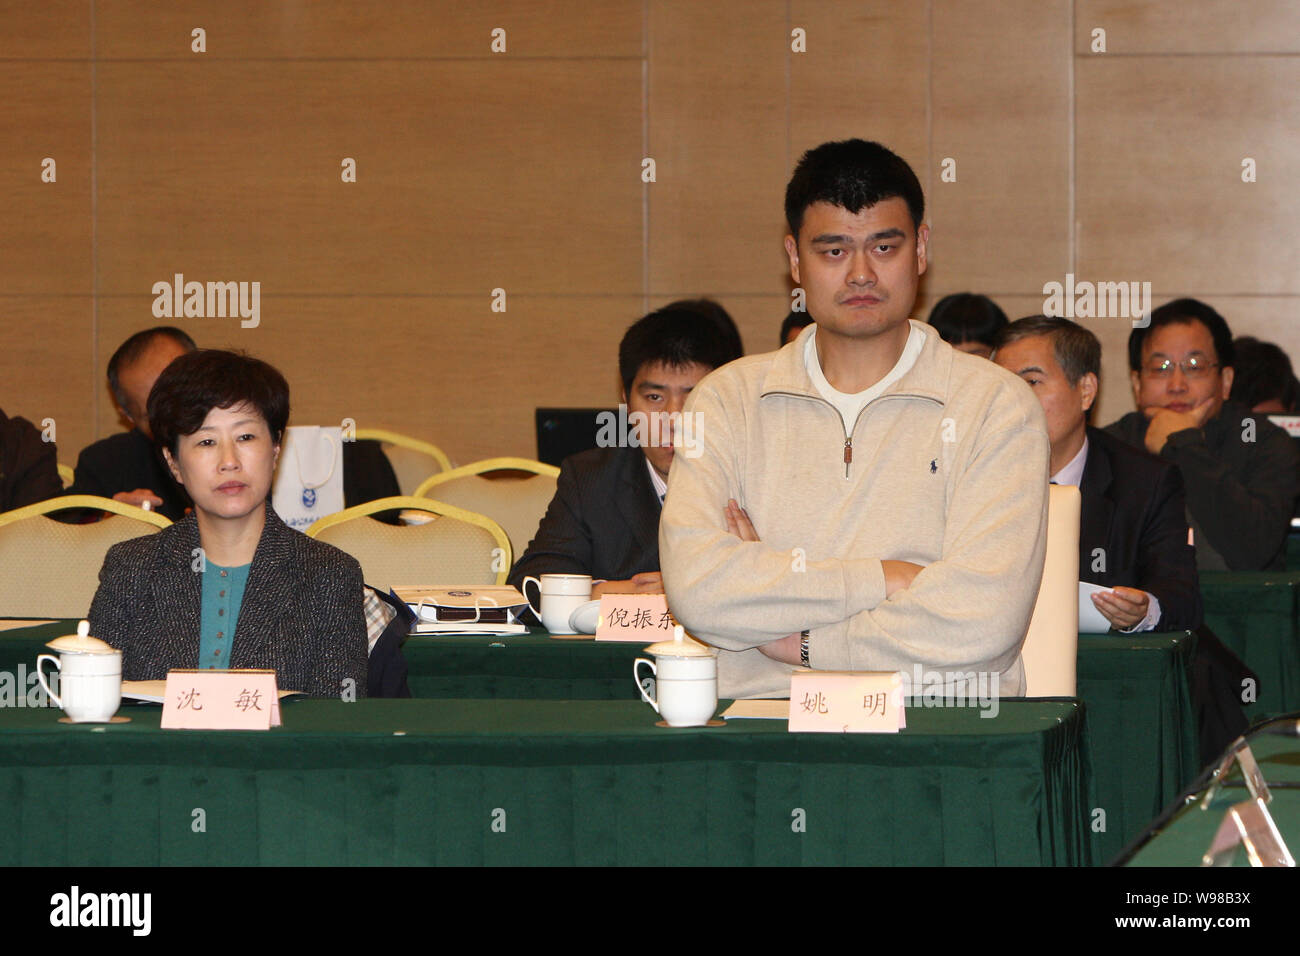 Retired Chinese basketball player Yao Ming is pictured during a meeting of Shanghai Public Diplomacy Association in Shanghai, China, 5 December 2011. Stock Photo